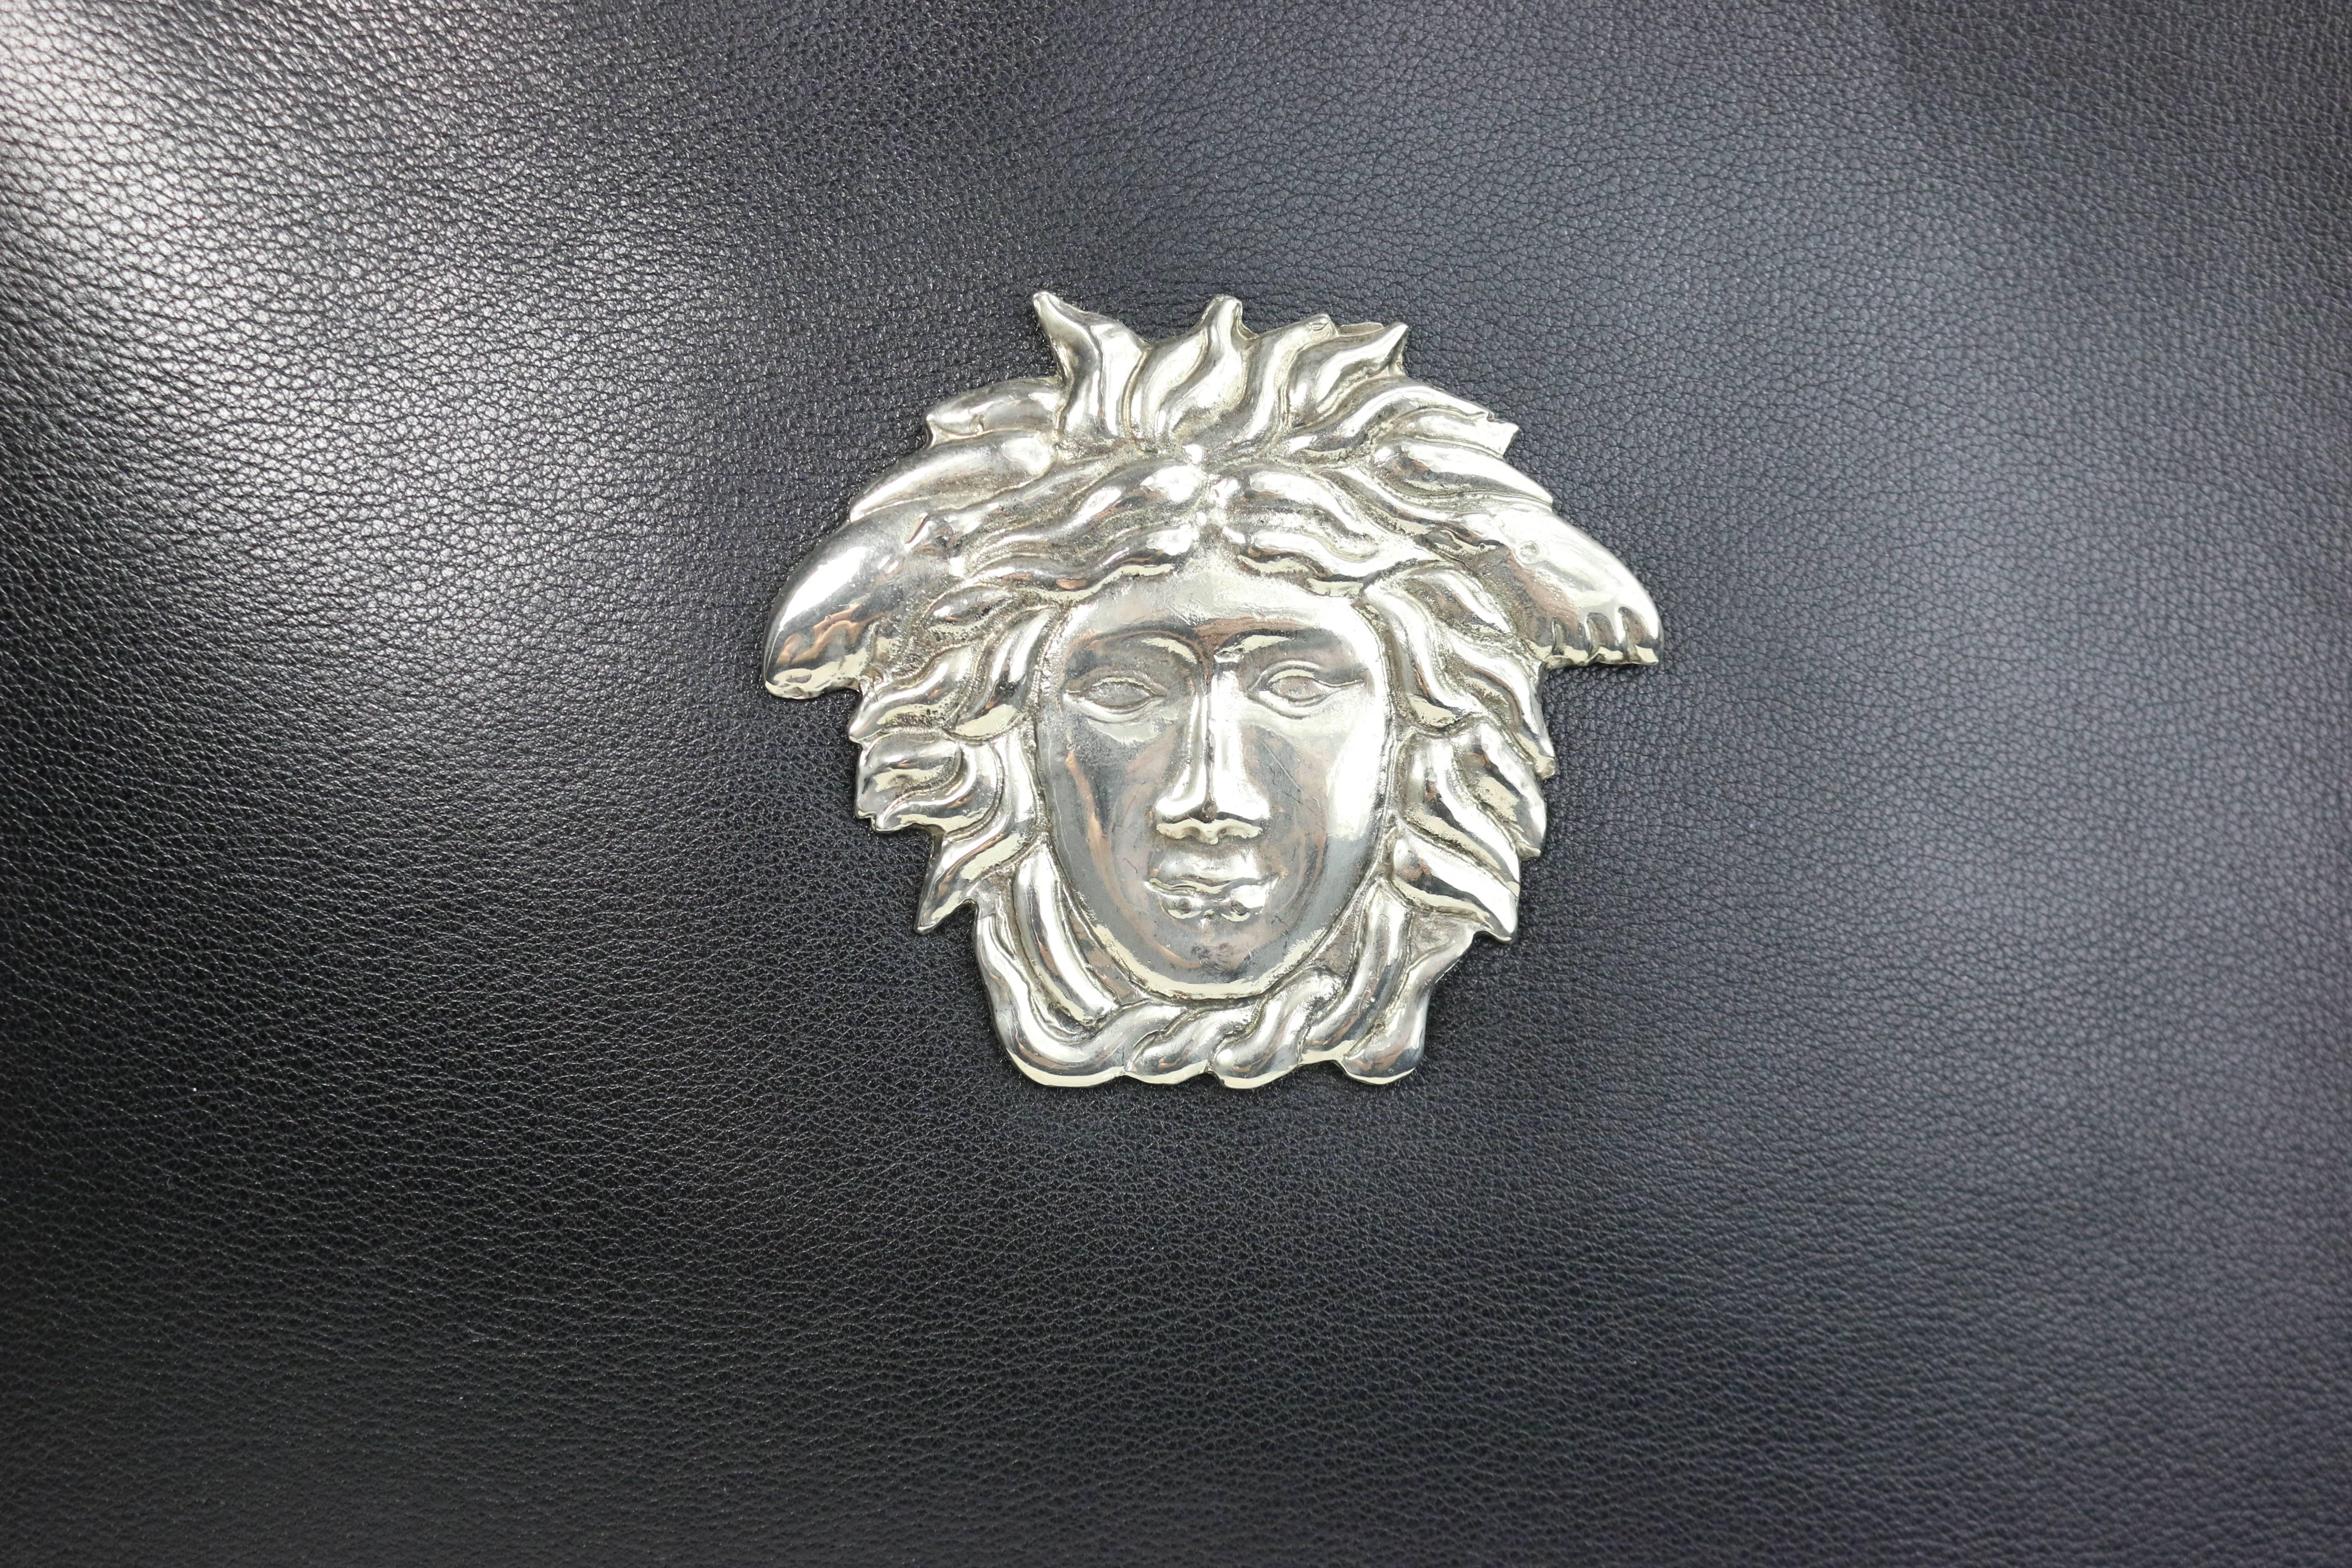 - Vintage 90s Gianni Versace black leather embedded silver Medusa handbag. 

- Silver toned metal Medusa double handle. 

- Silver toned Medusa zip closure. 

- Interior zip pocket. 

- Length: 10 inches. Height: 8.5 inches. Width: 3 inches. Hand